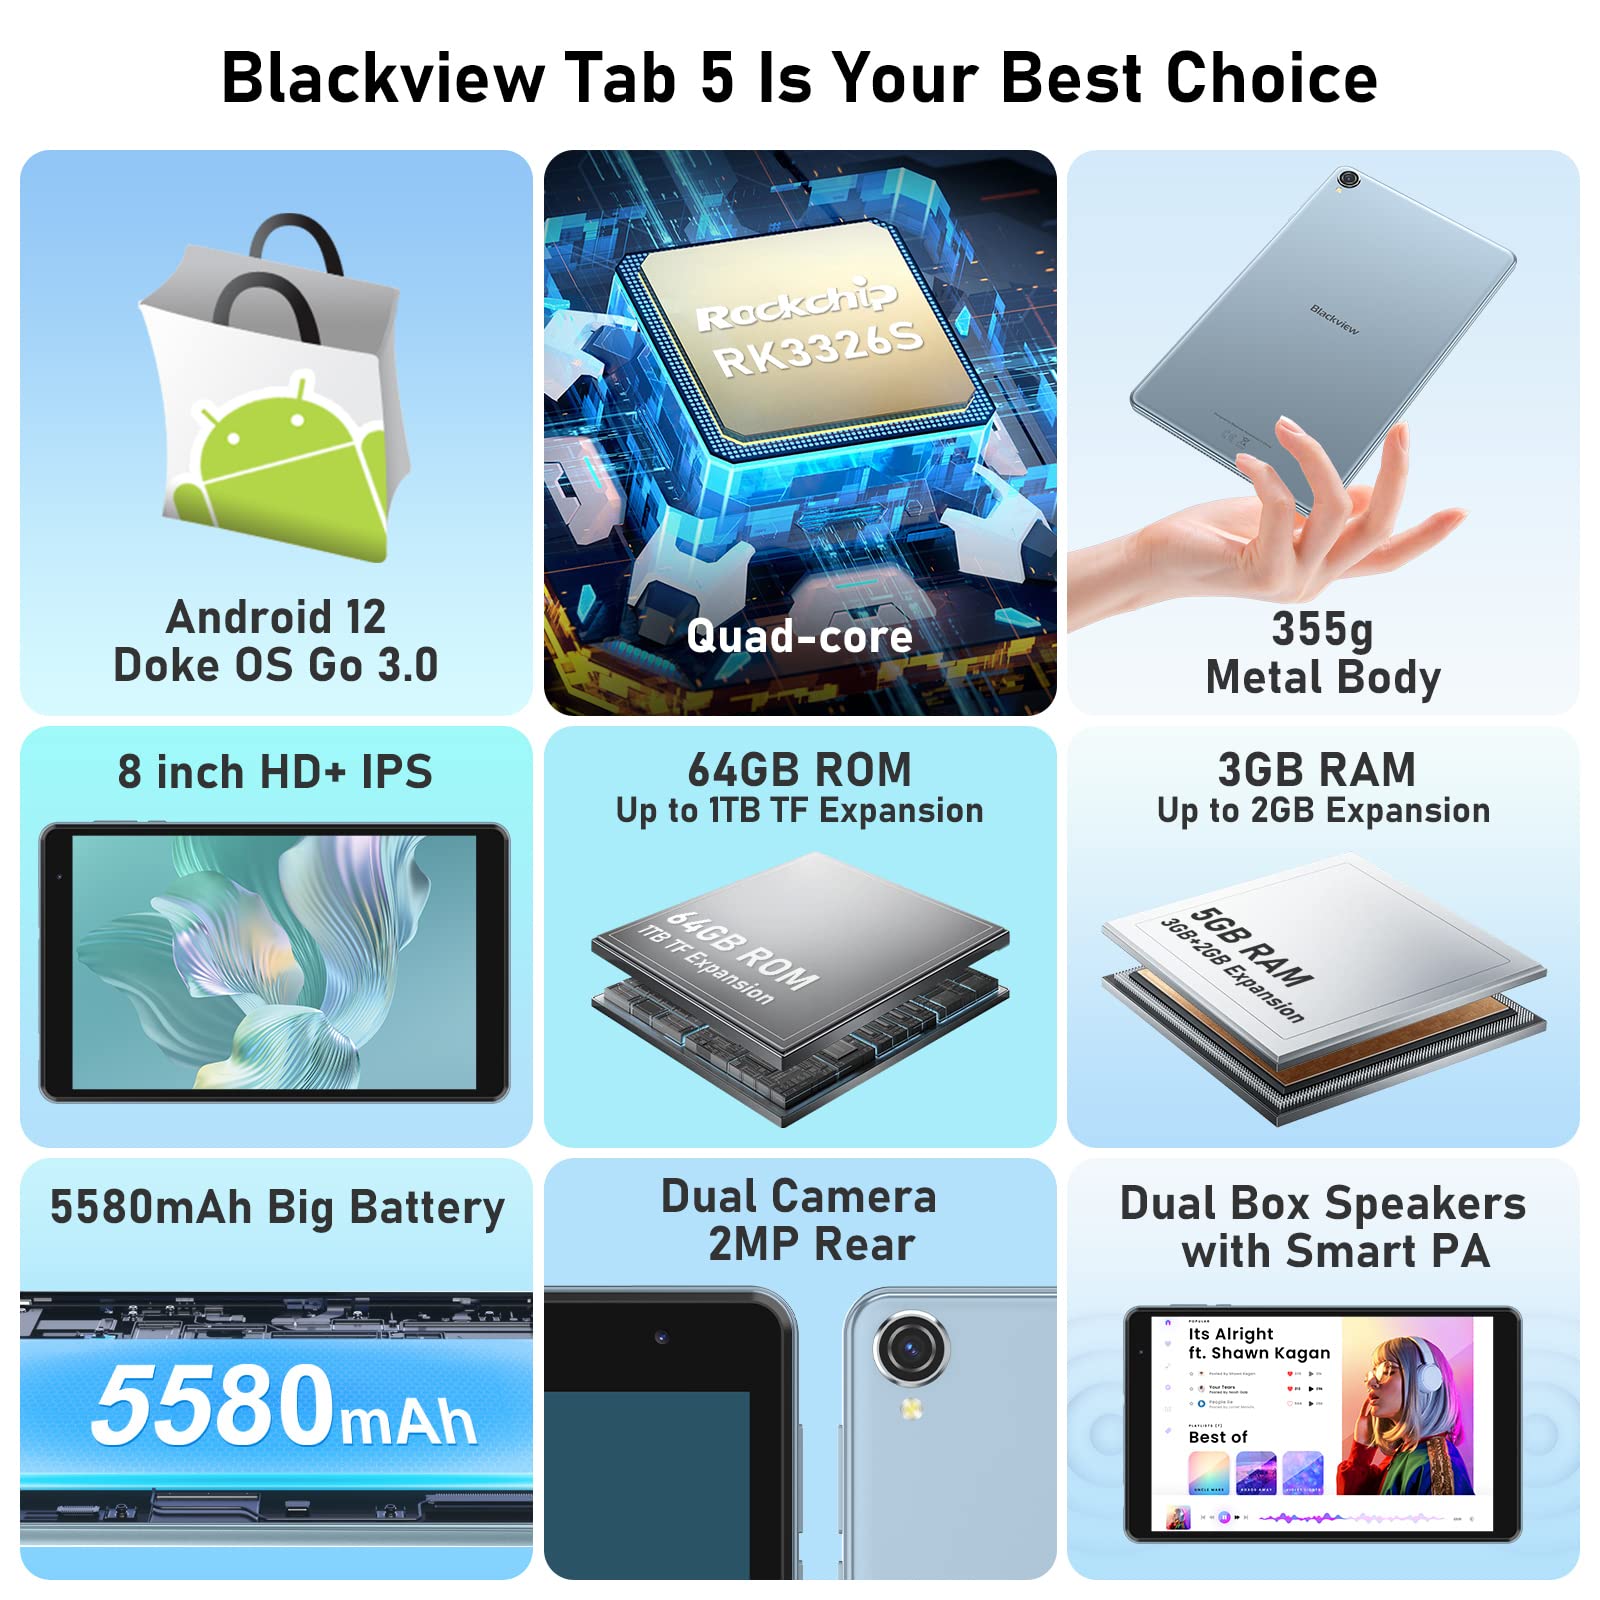 Blackview Tab 5 Tablets, 2023 Latest Tablet Android 12, Quad-Core 5GB(3+2) RAM 64GB ROM up to 1TB TF, 8 inch Tablet HD+ IPS 1280*800, Android Tablet 5580mAh Big Battery, Dual BOX Speakers WiFi, Blue